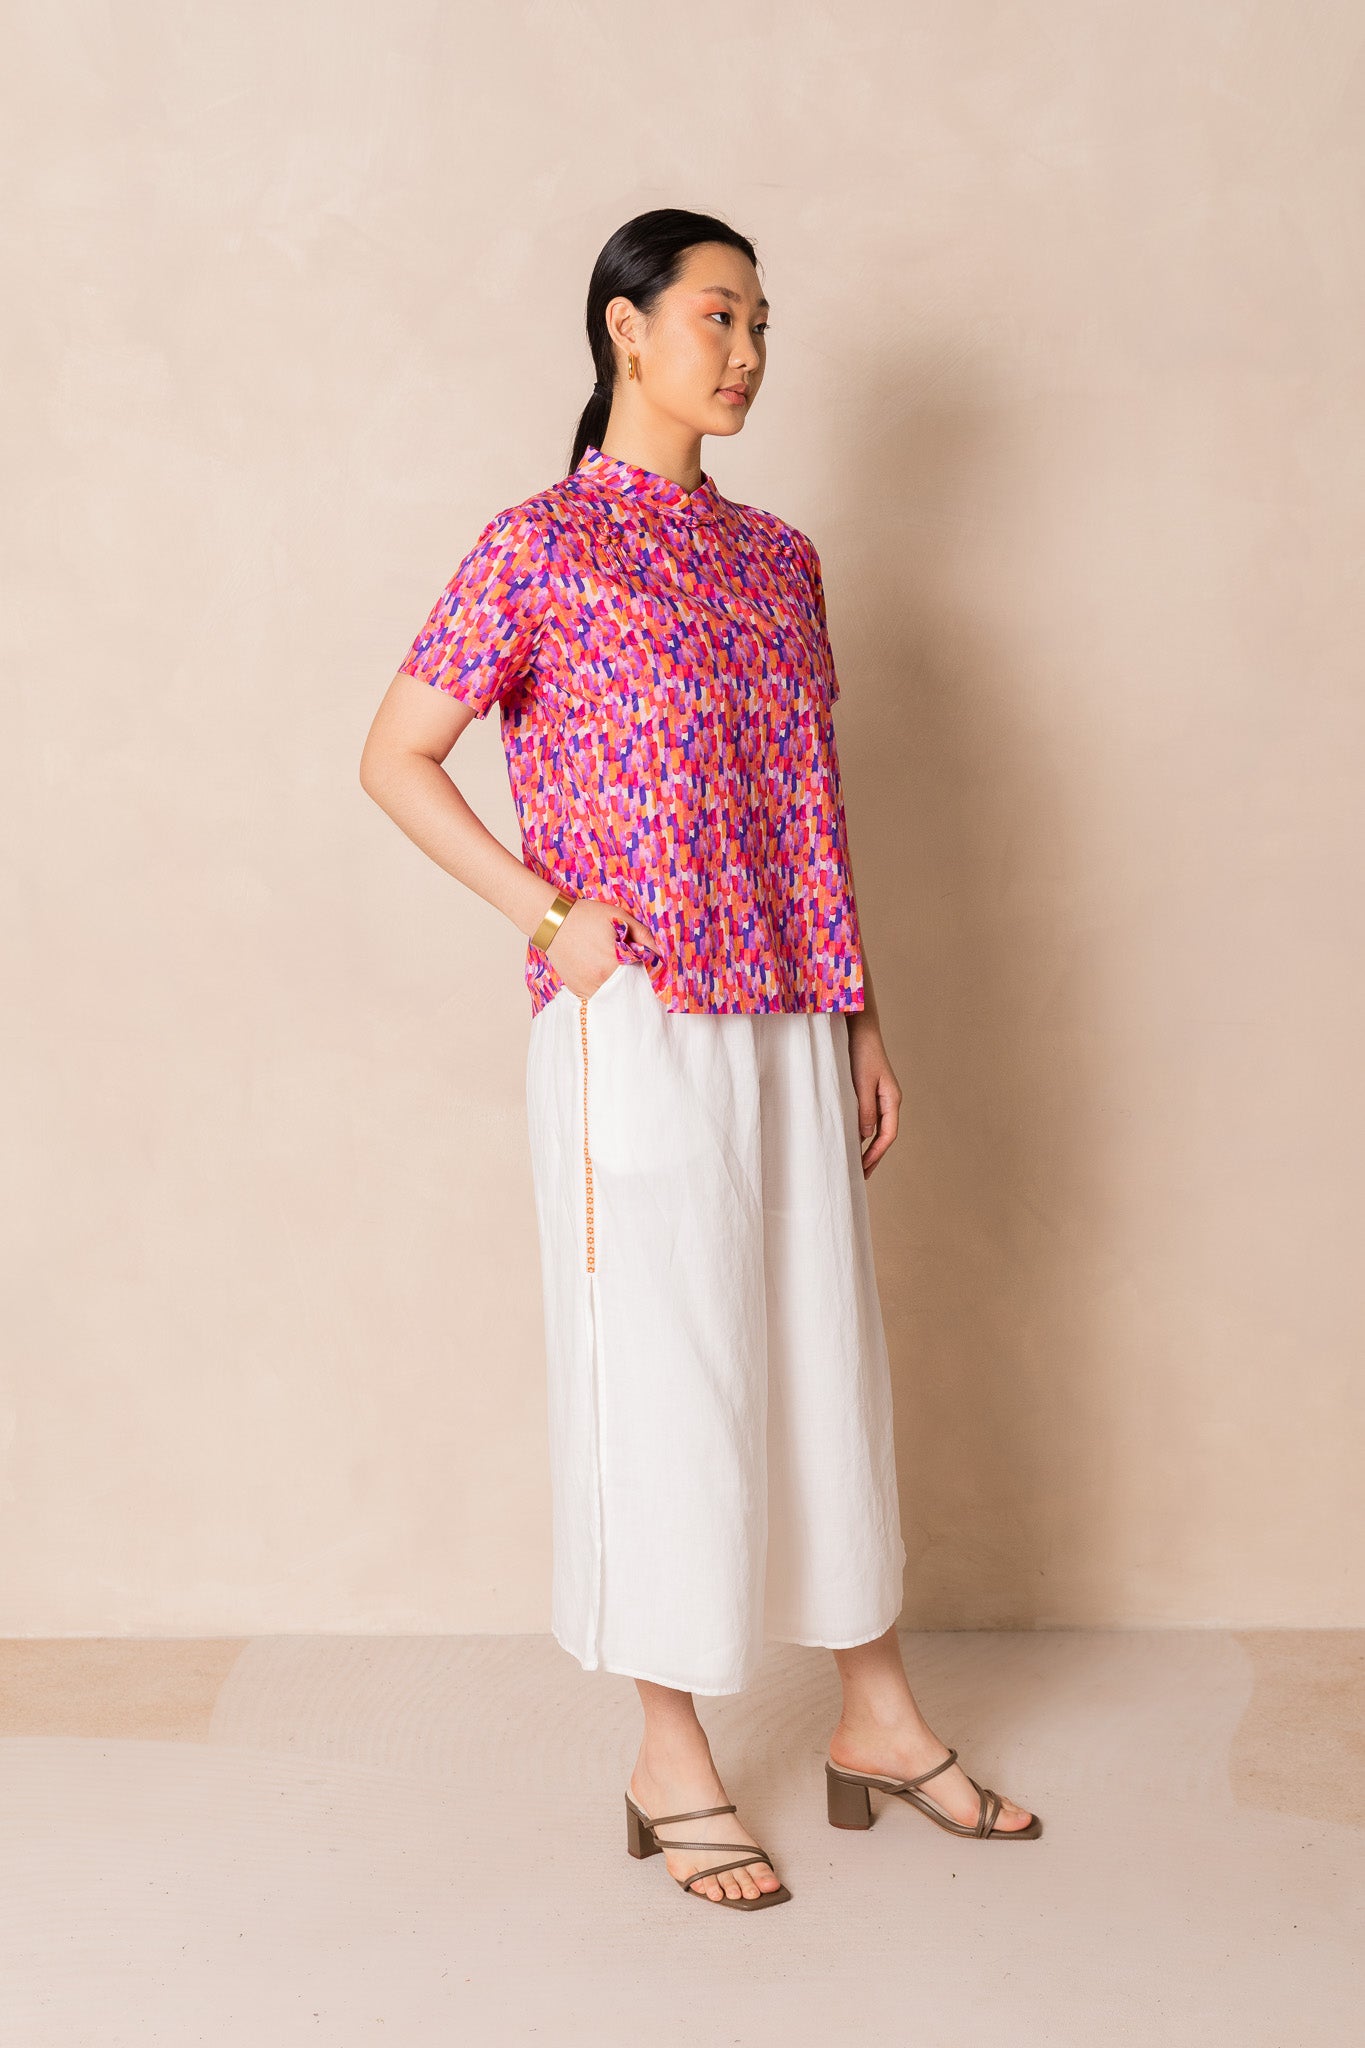 Water Colour Raindrop Print Short Sleeve Cheongsam Top, available on You Living 